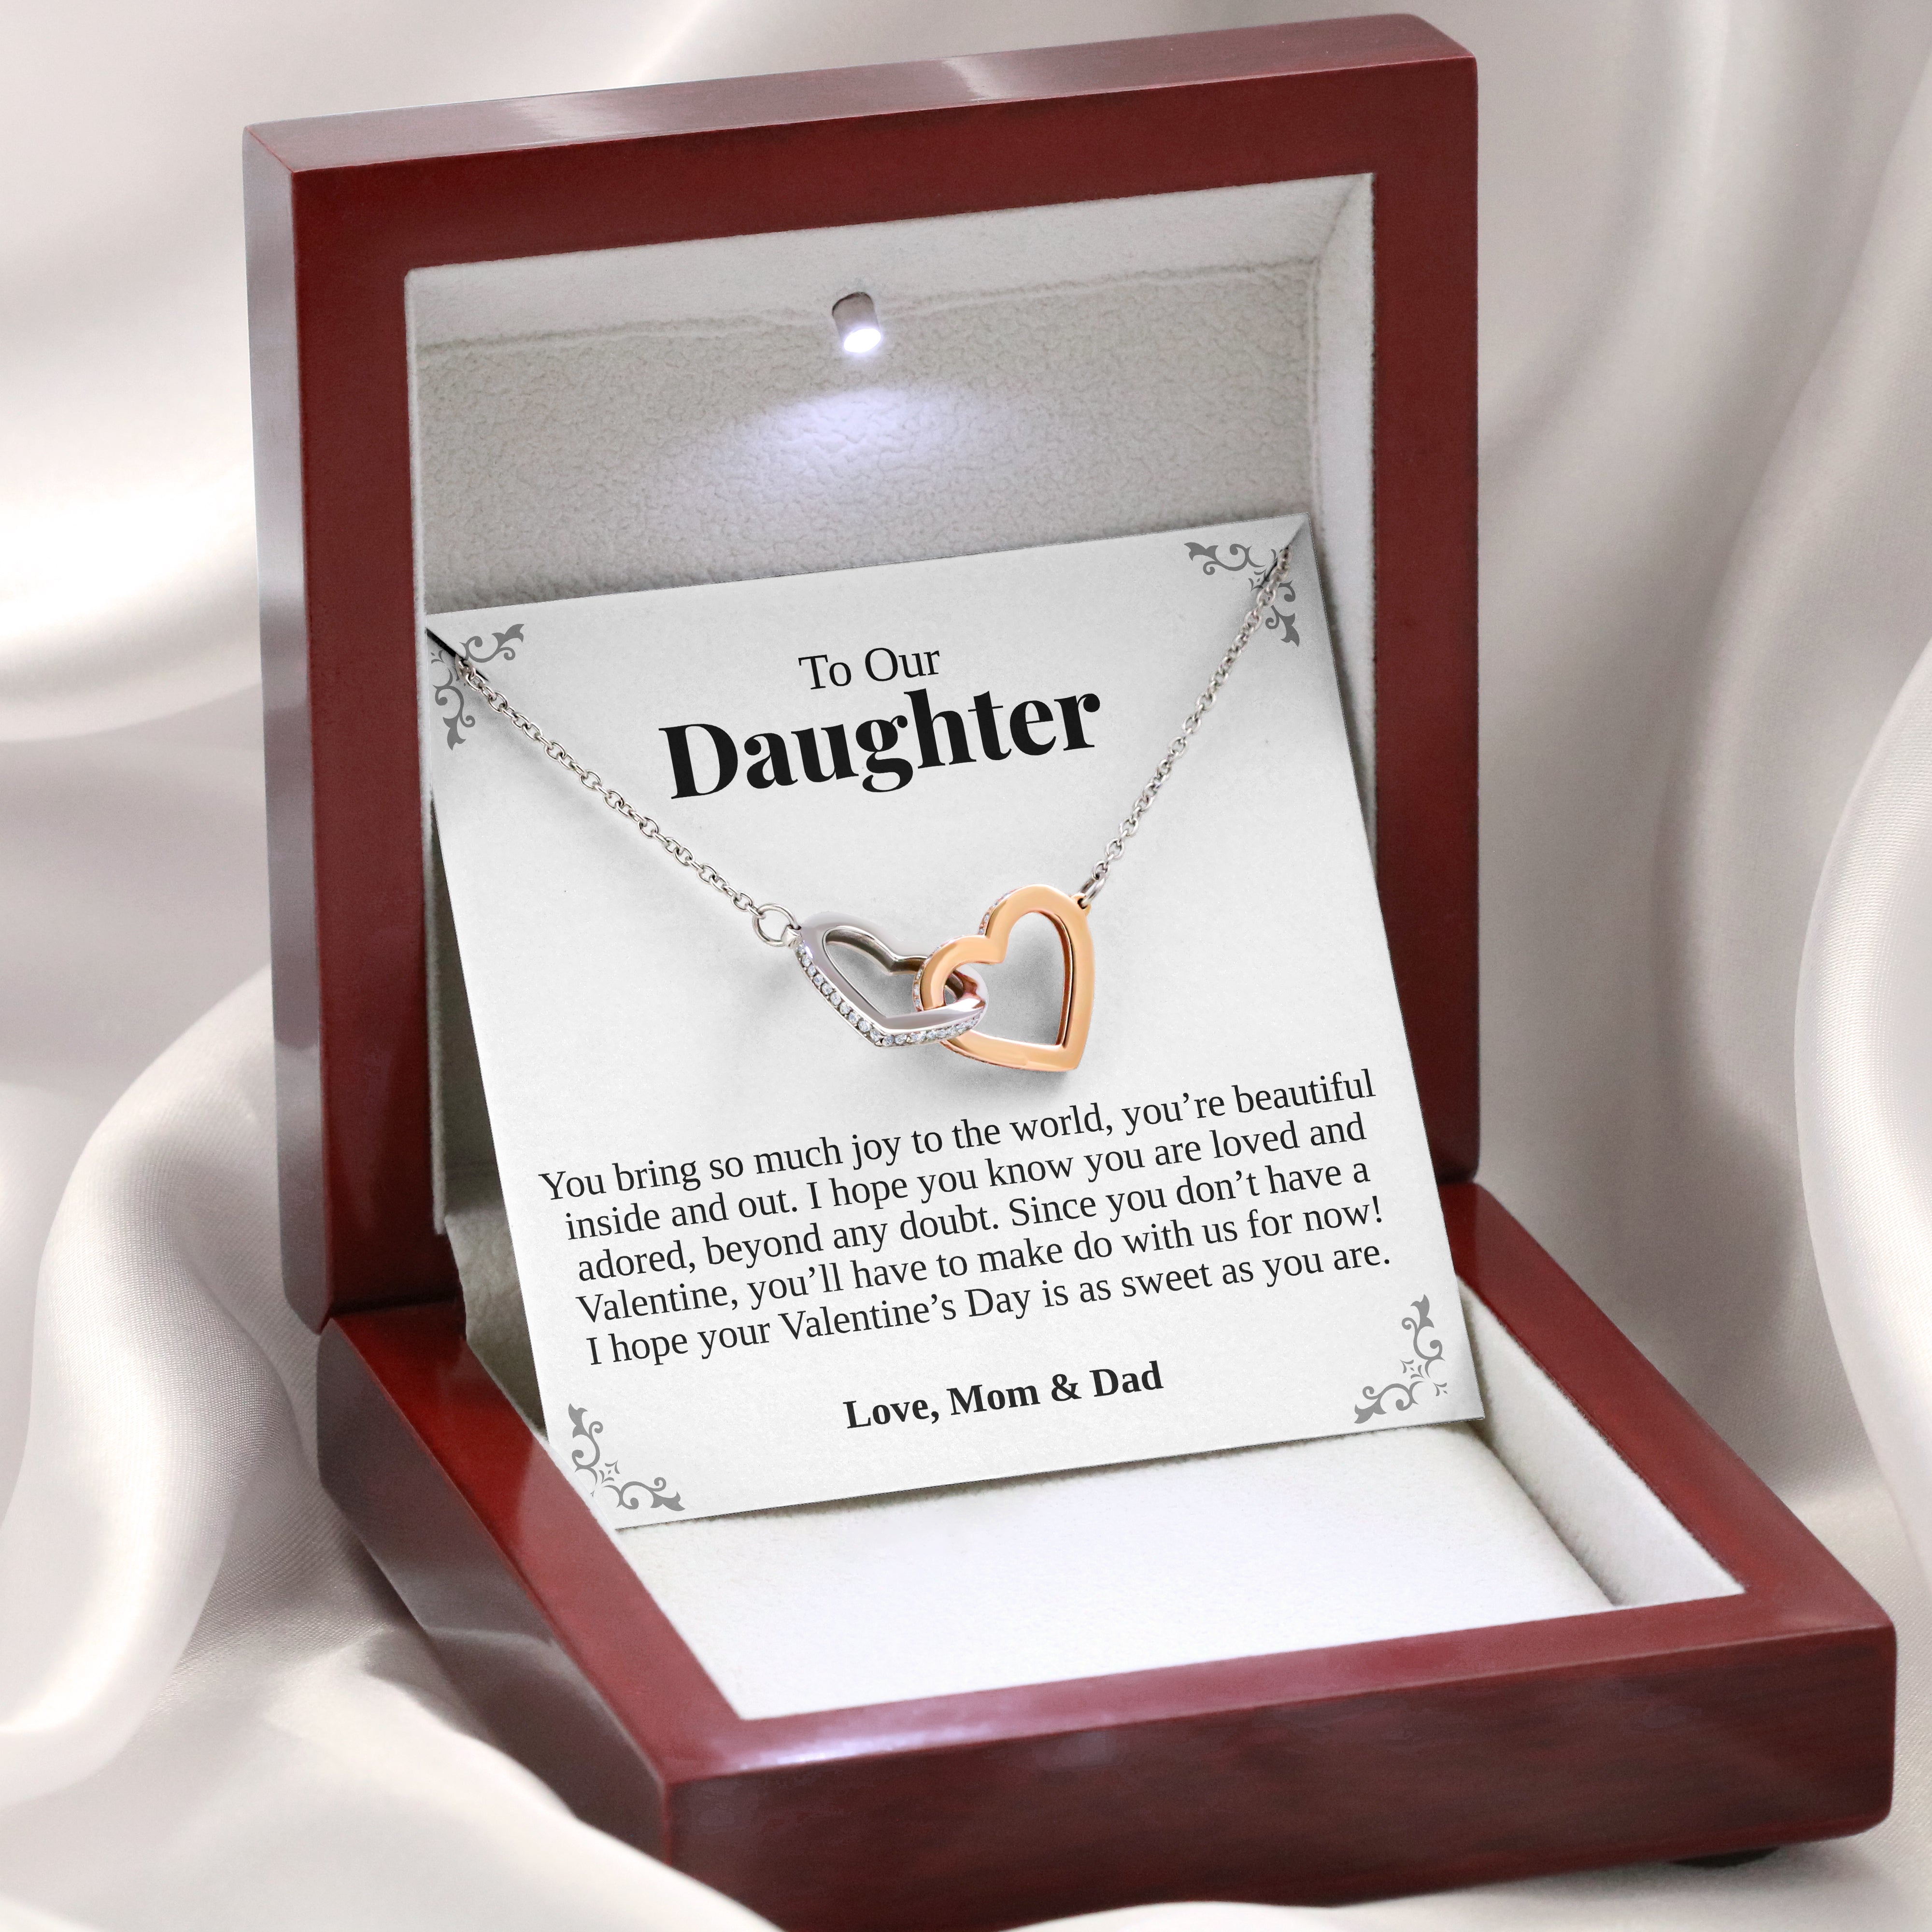 To Our Daughter | “As Sweet As You Are” | Interlocking Hearts Necklace